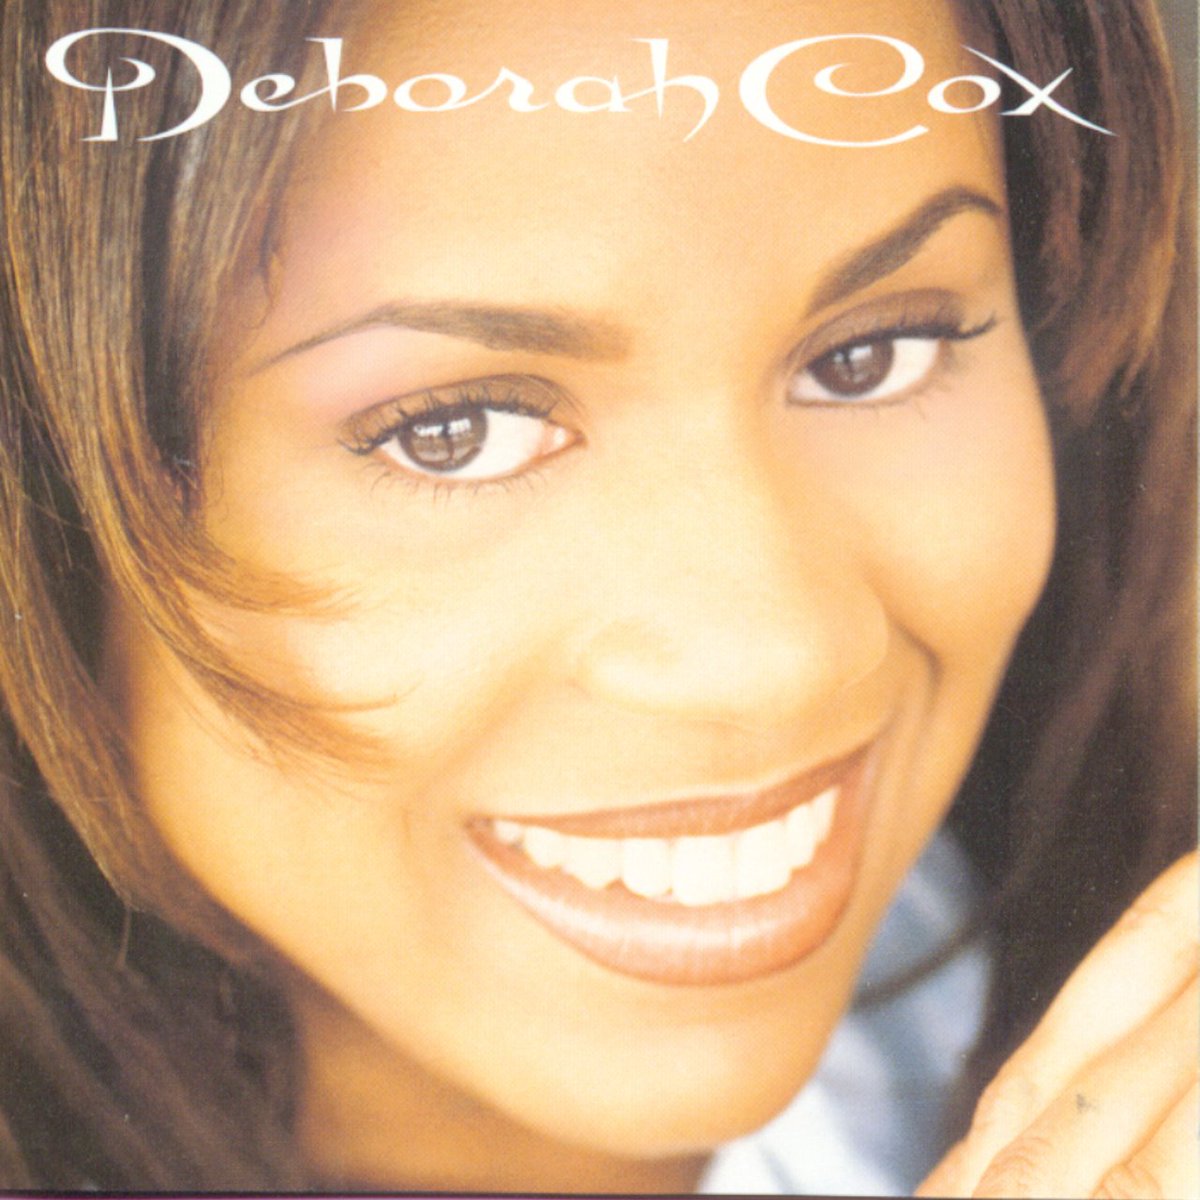 Radio 00 1 Big Song Deborah Cox Planethaaibo 1 Sentimental 2 We Can T Be Friends 3 Nobody S Supposed To Be Here 4 Who Do U Love 5 Where Do We Go